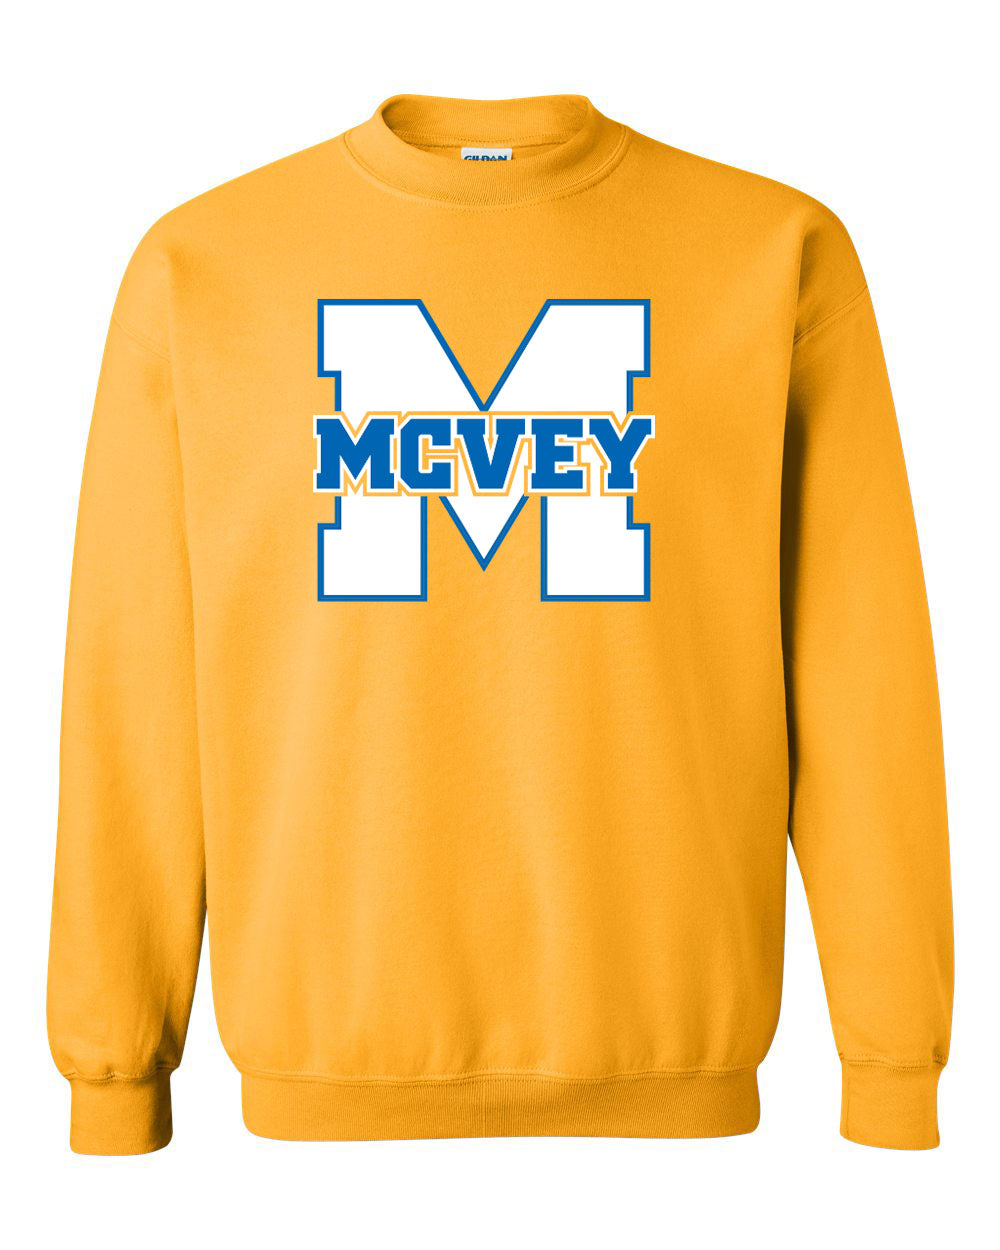 New! MCVEY Youth/Adult Crewneck Sweatshirt (additional colors available)